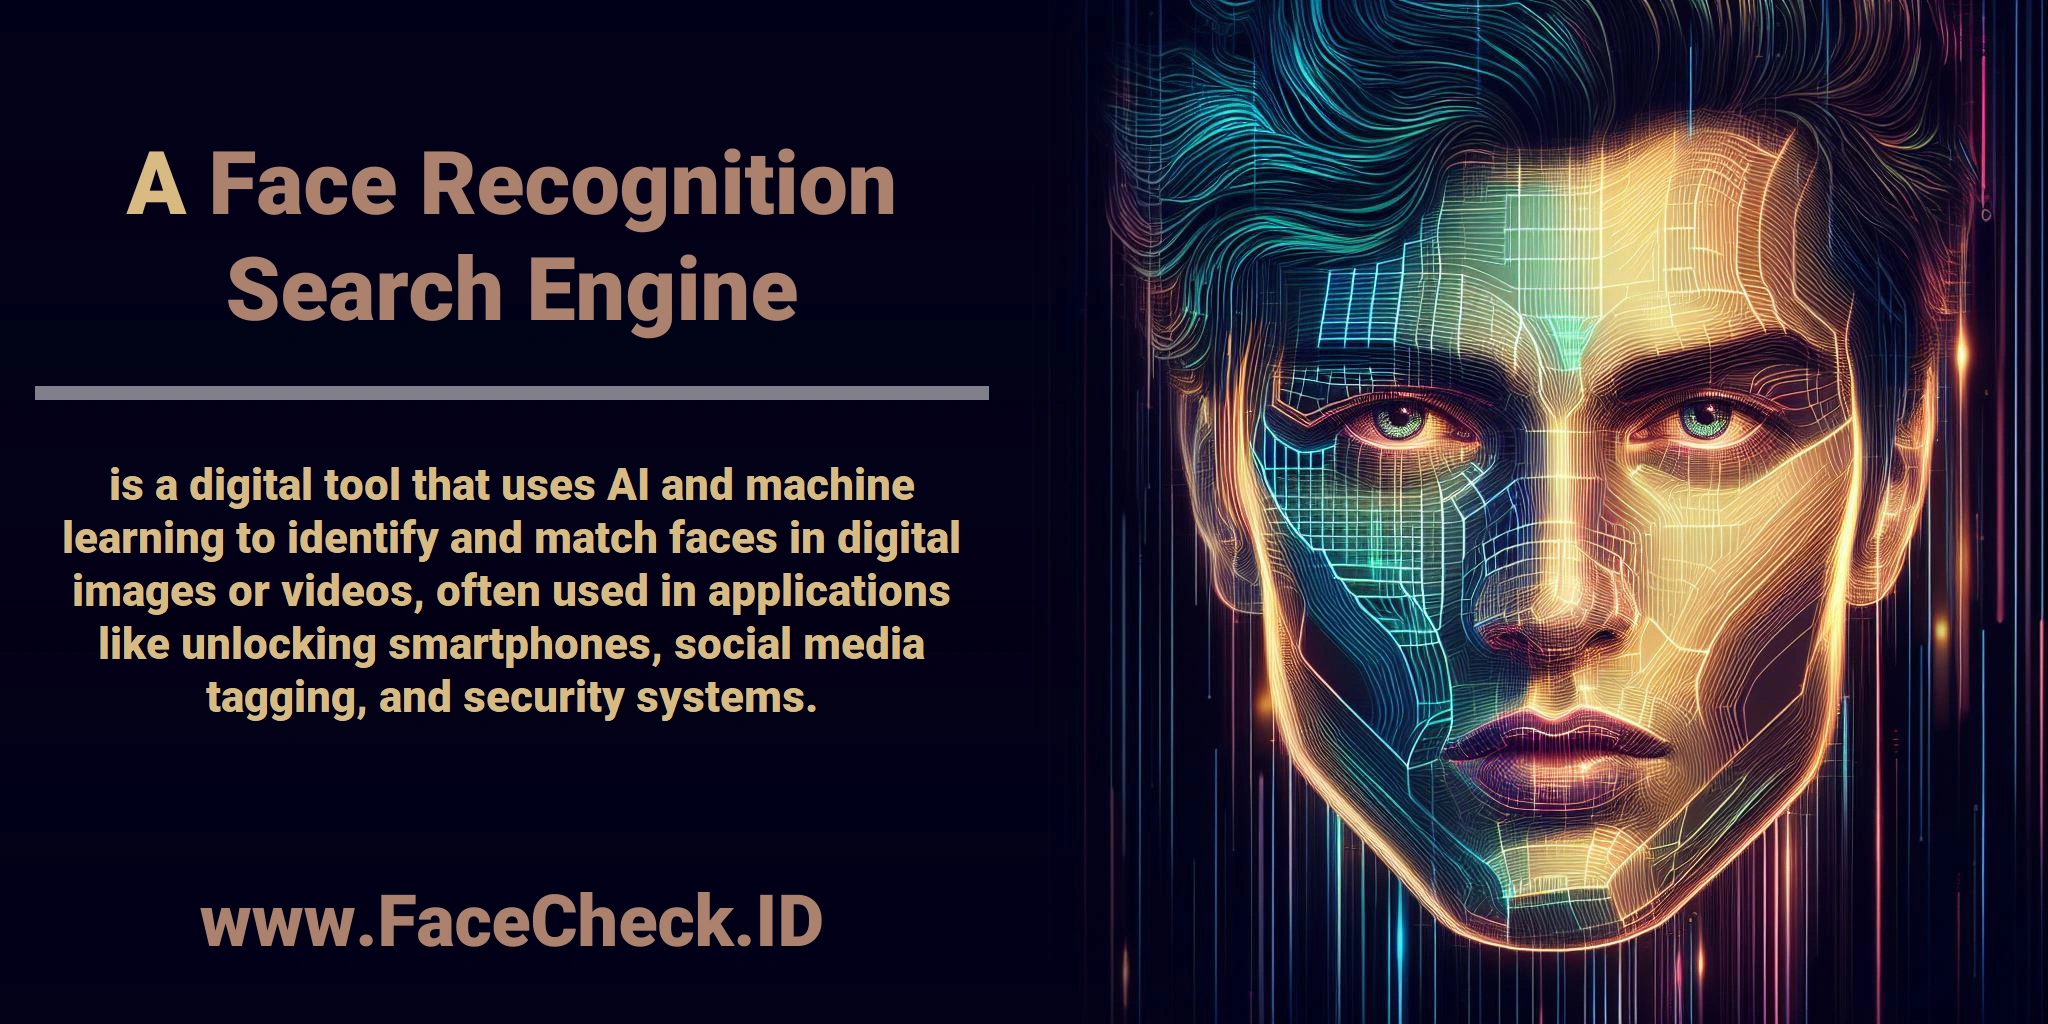 A <b>Face Recognition Search Engine</b> is a digital tool that uses AI and machine learning to identify and match faces in digital images or videos, often used in applications like unlocking smartphones, social media tagging, and security systems.